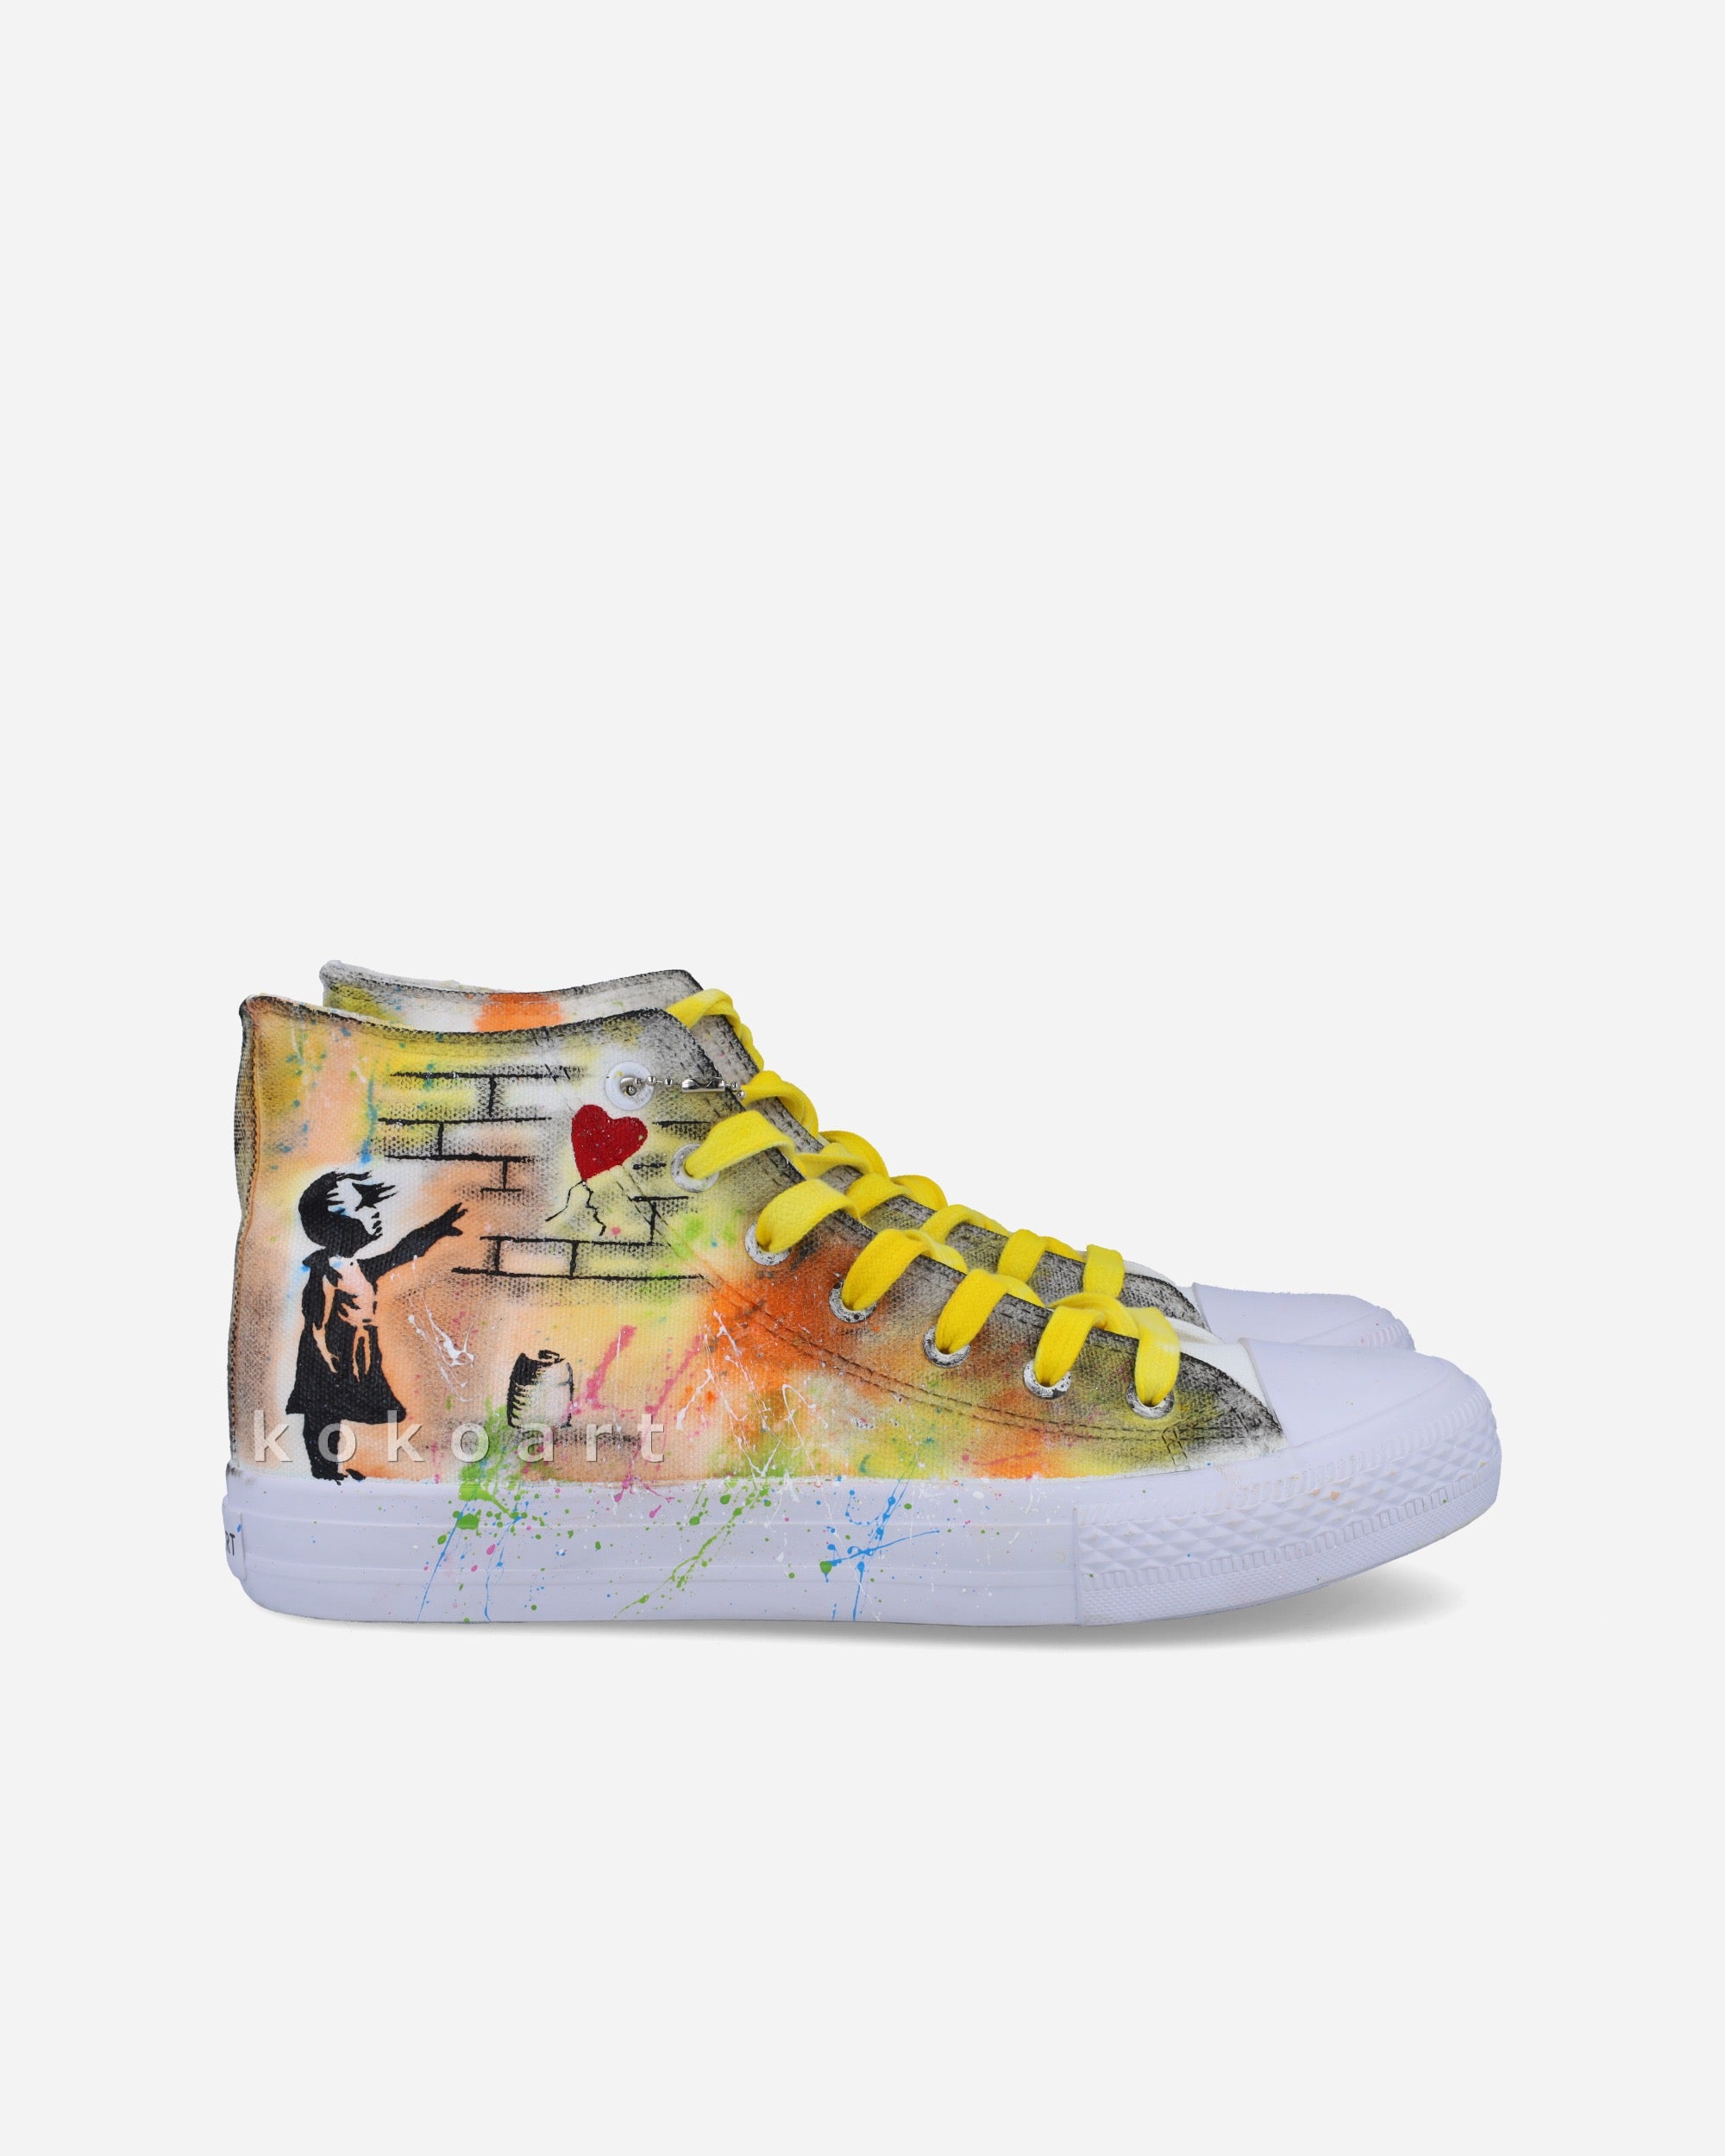 Banksy Girl with Balloon Graffiti Wall Hand Painted Shoes